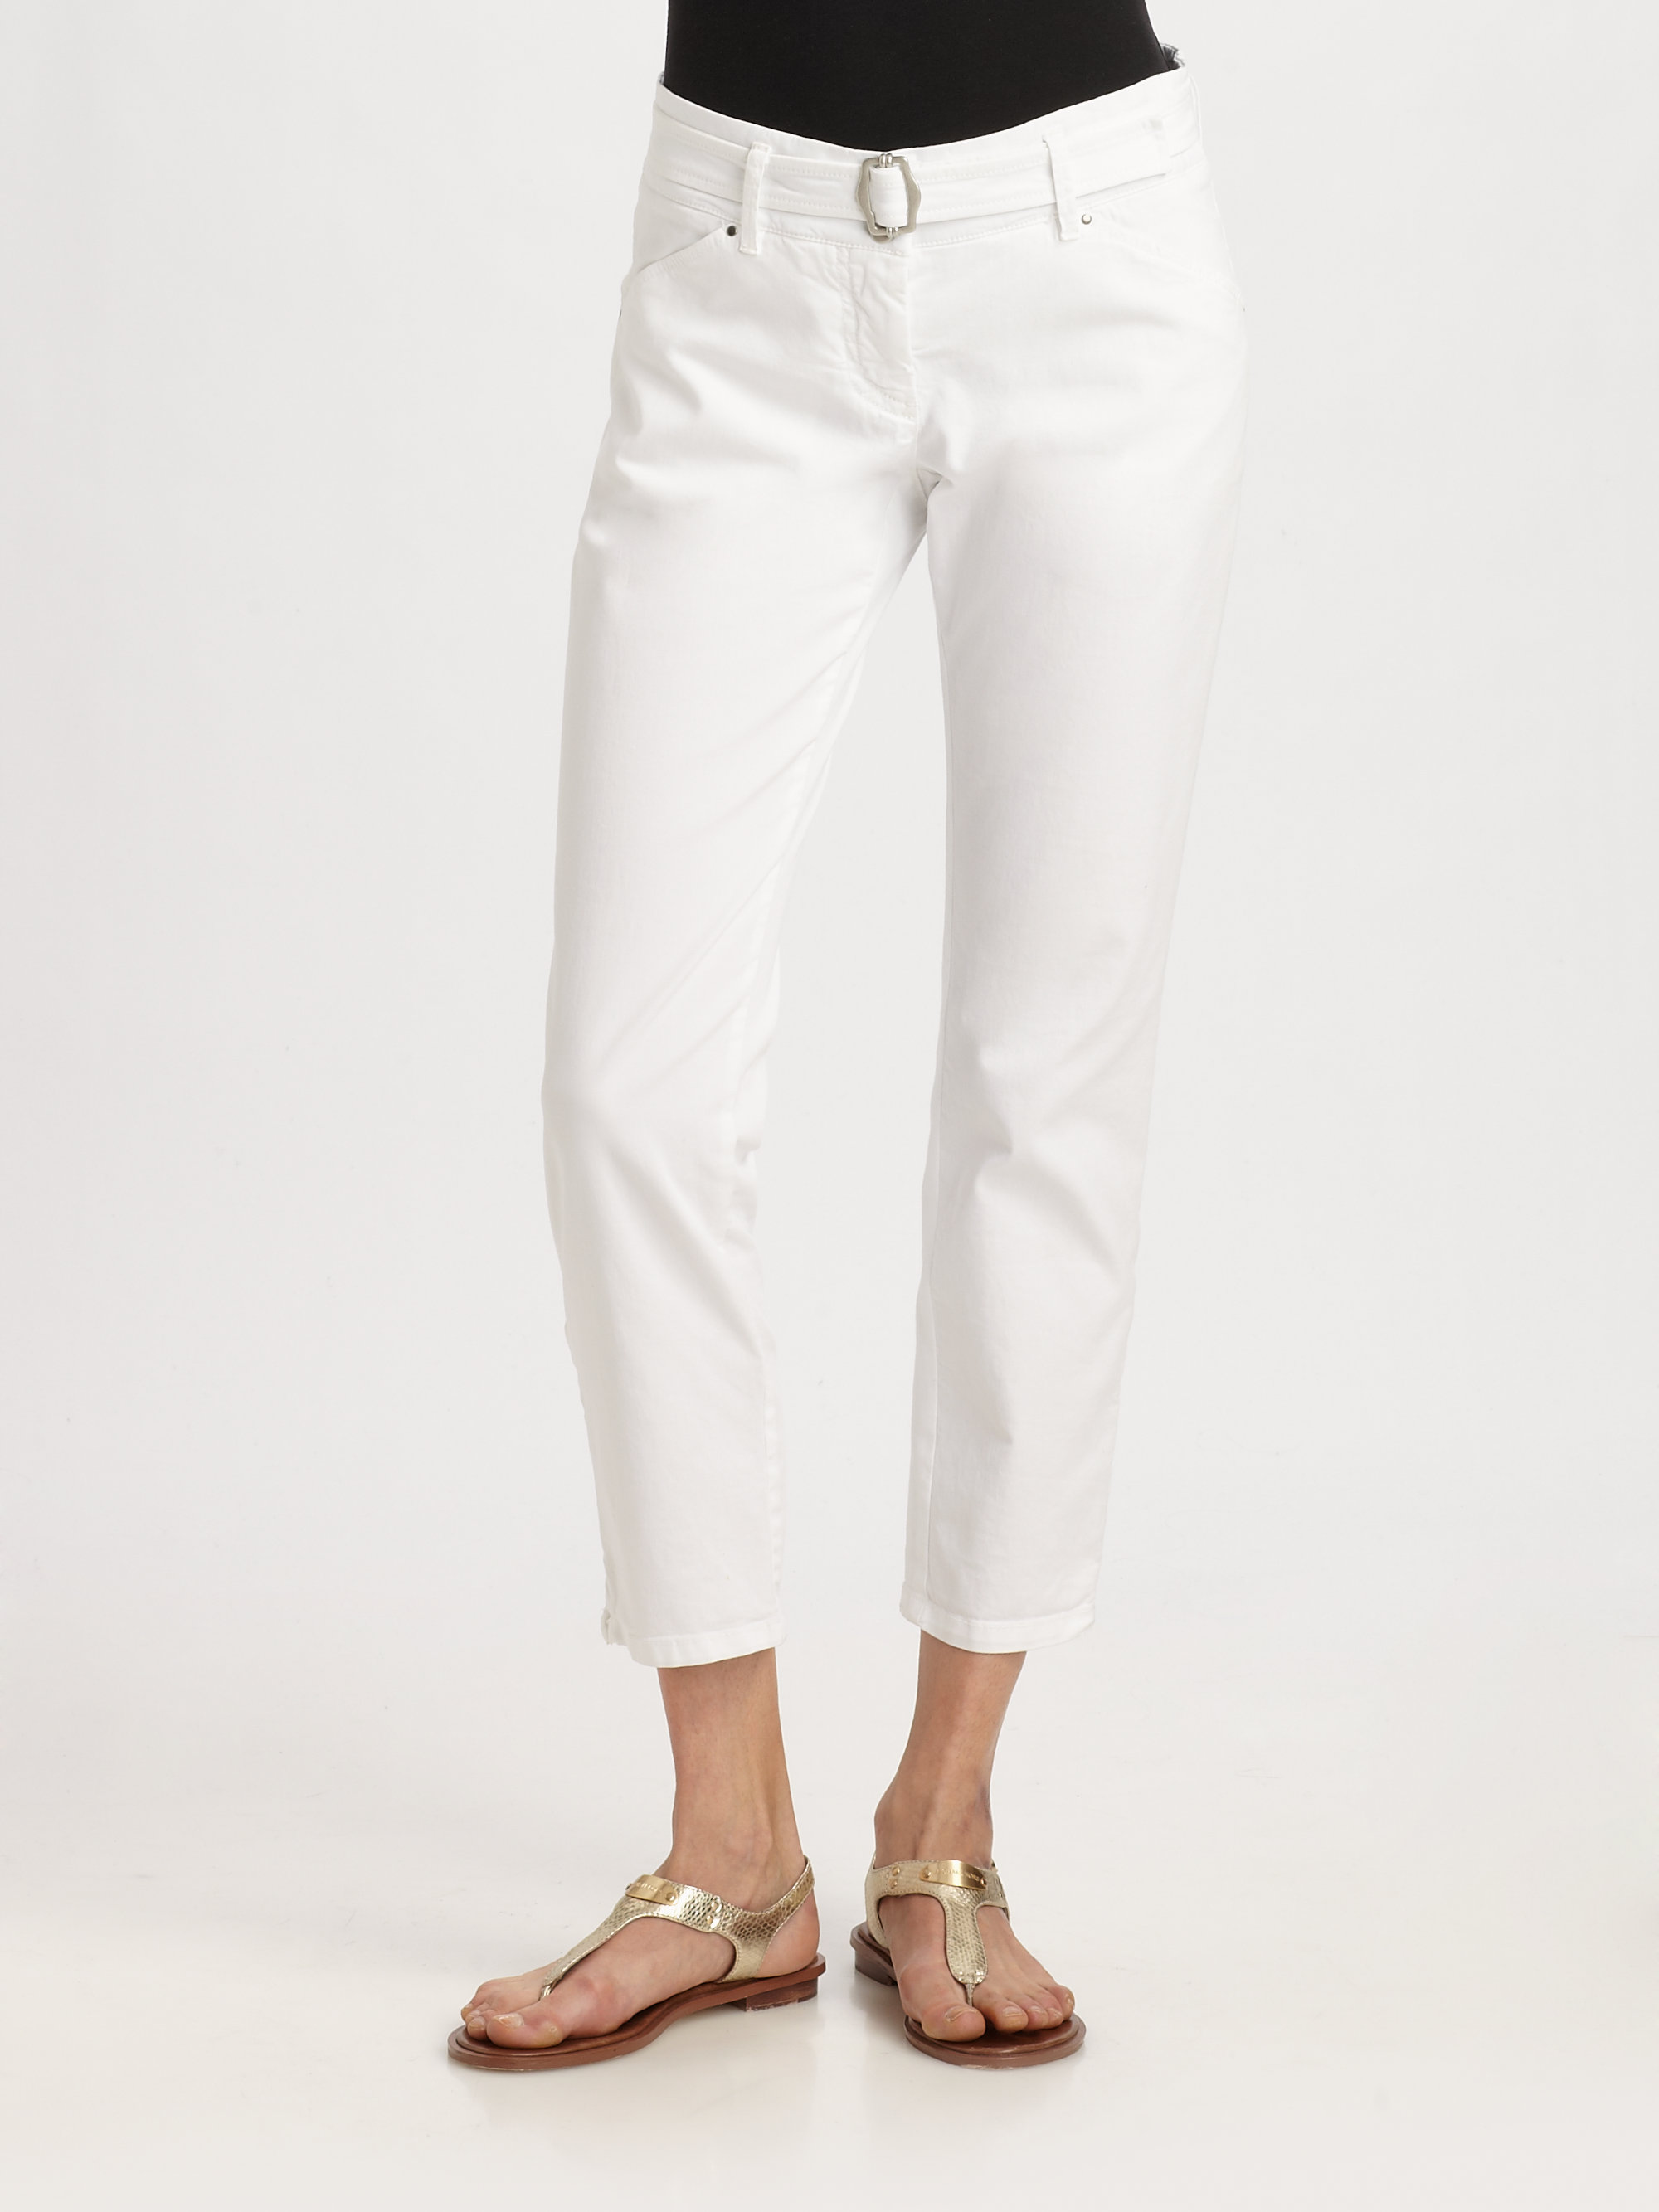 Lyst - Weekend By Maxmara Vanna Anklezip Pants in White